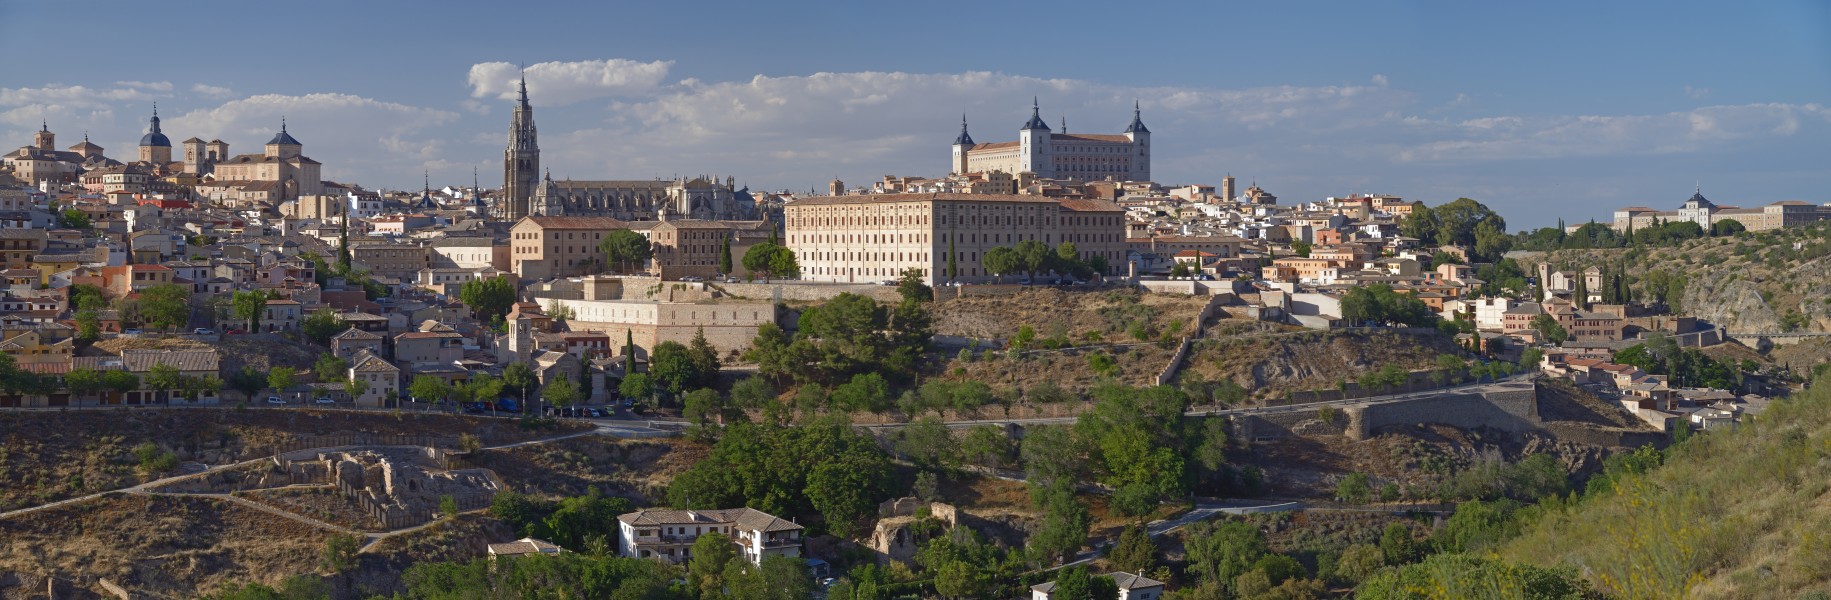 Panorama of Toledo at sunset. View from the south